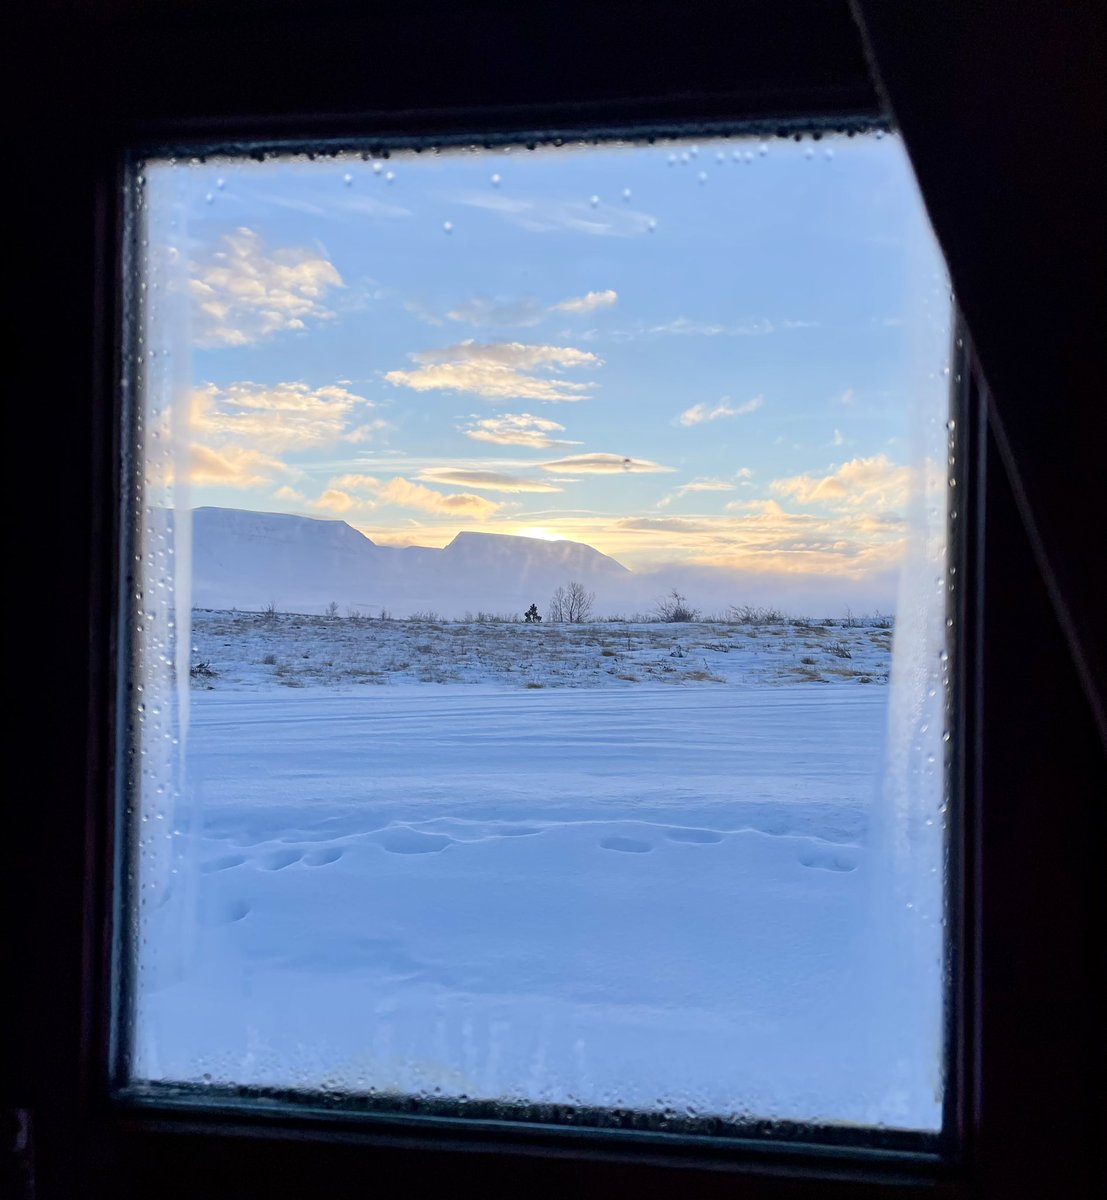 Nice view to wake up to in Varmahlíð this morning! #Iceland ❄️